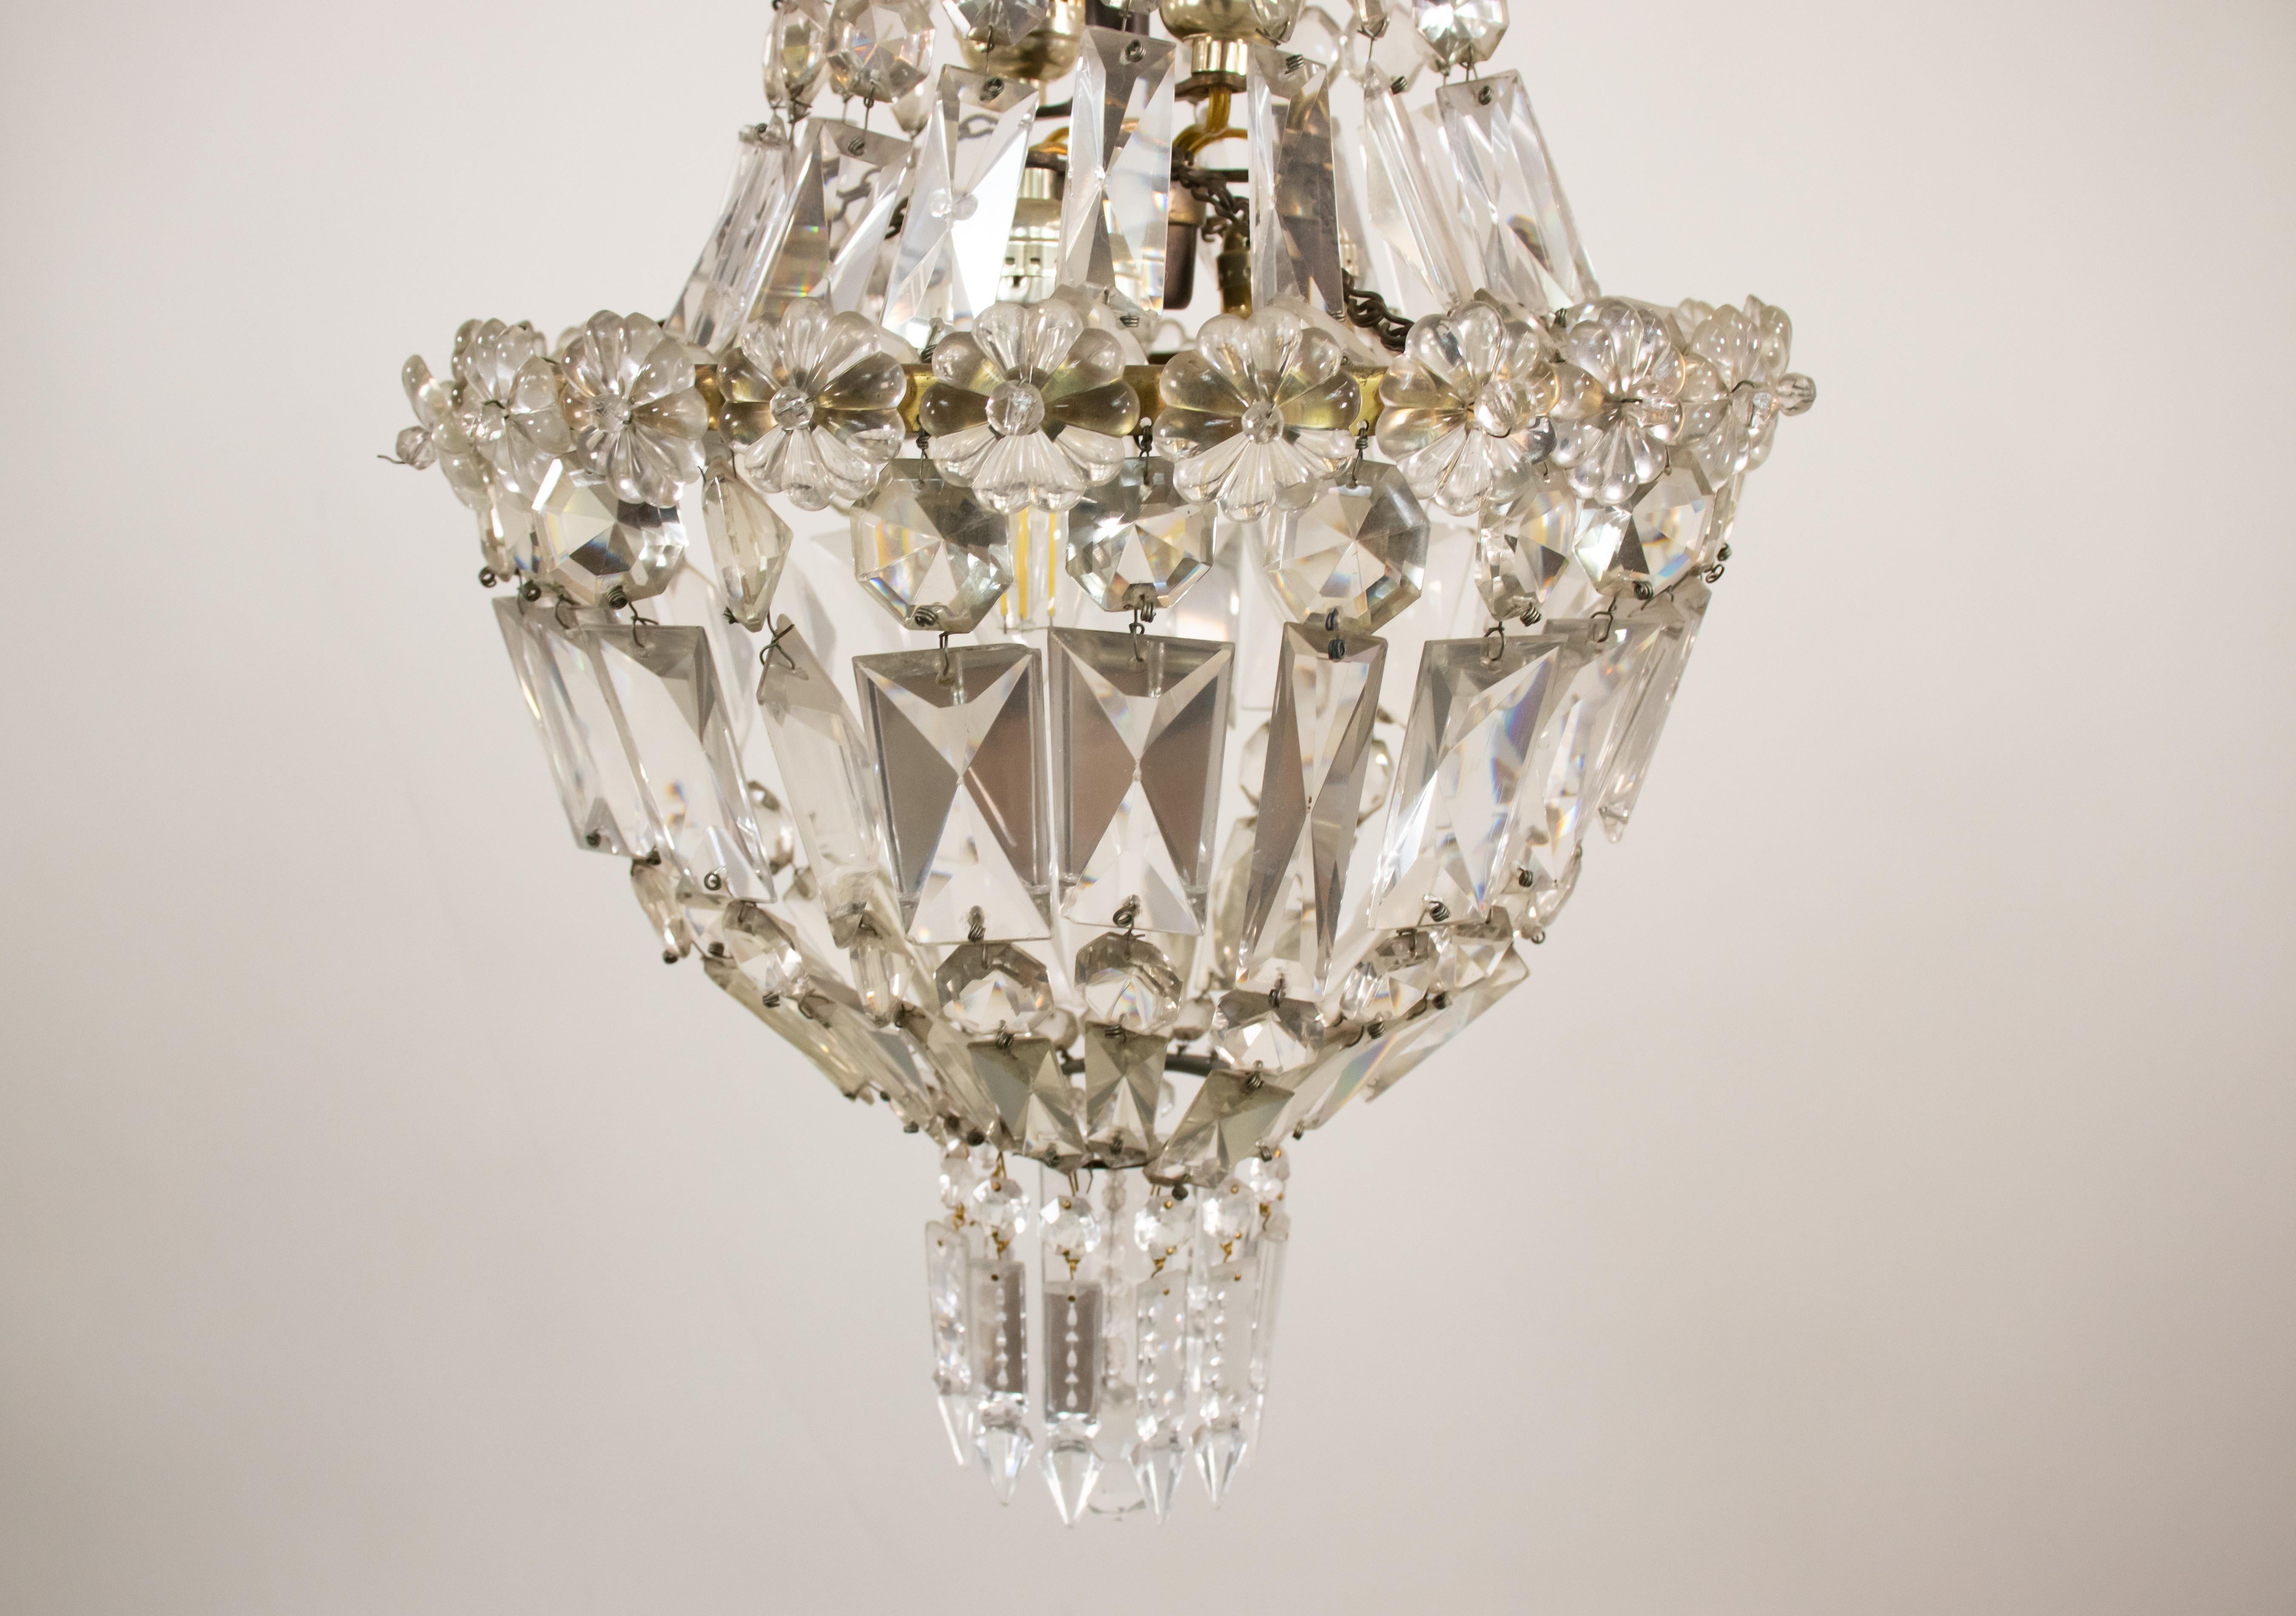 Early 20th Century French Empire Style Crystal Chandelier For Sale 9